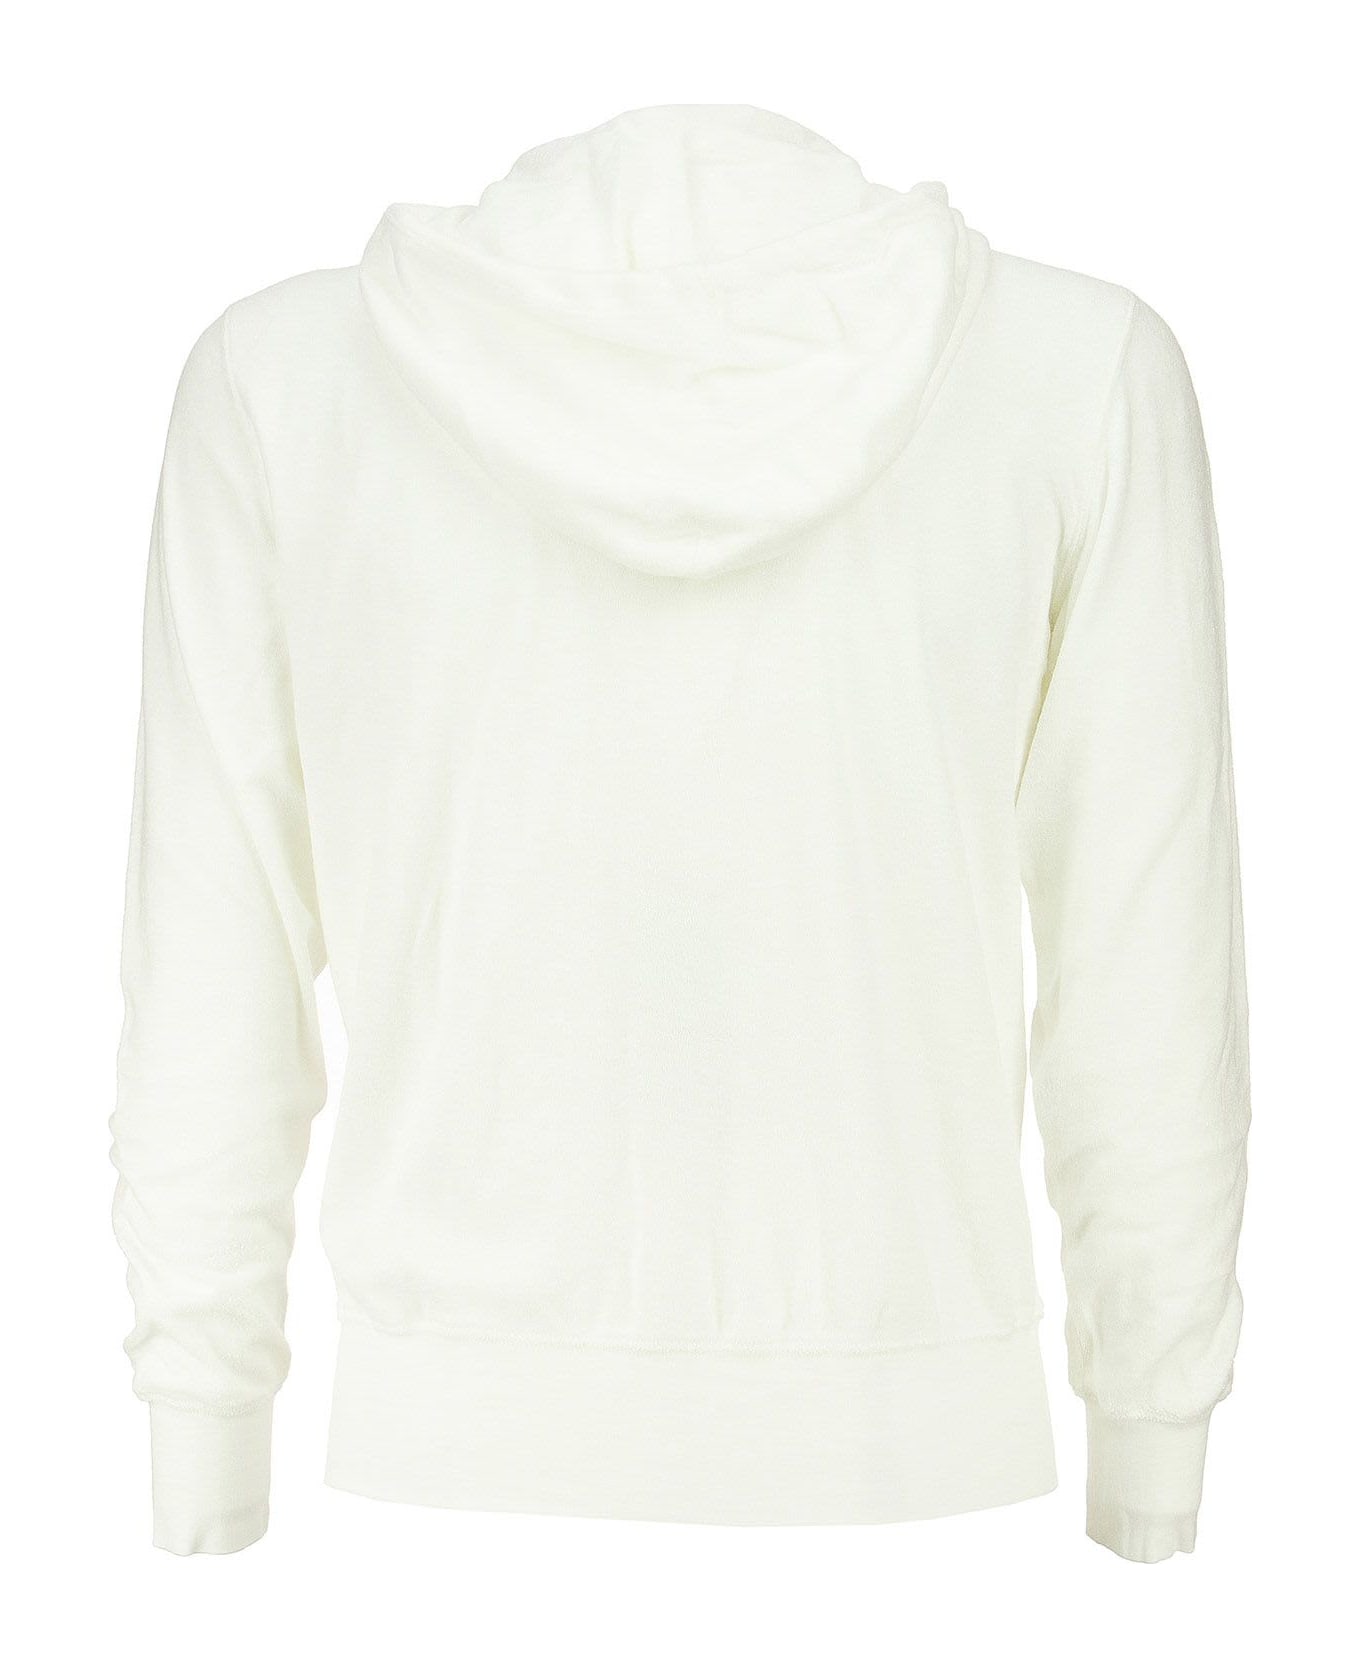 Majestic Filatures Hooded Sweatshirt In Cotton And Modal - White